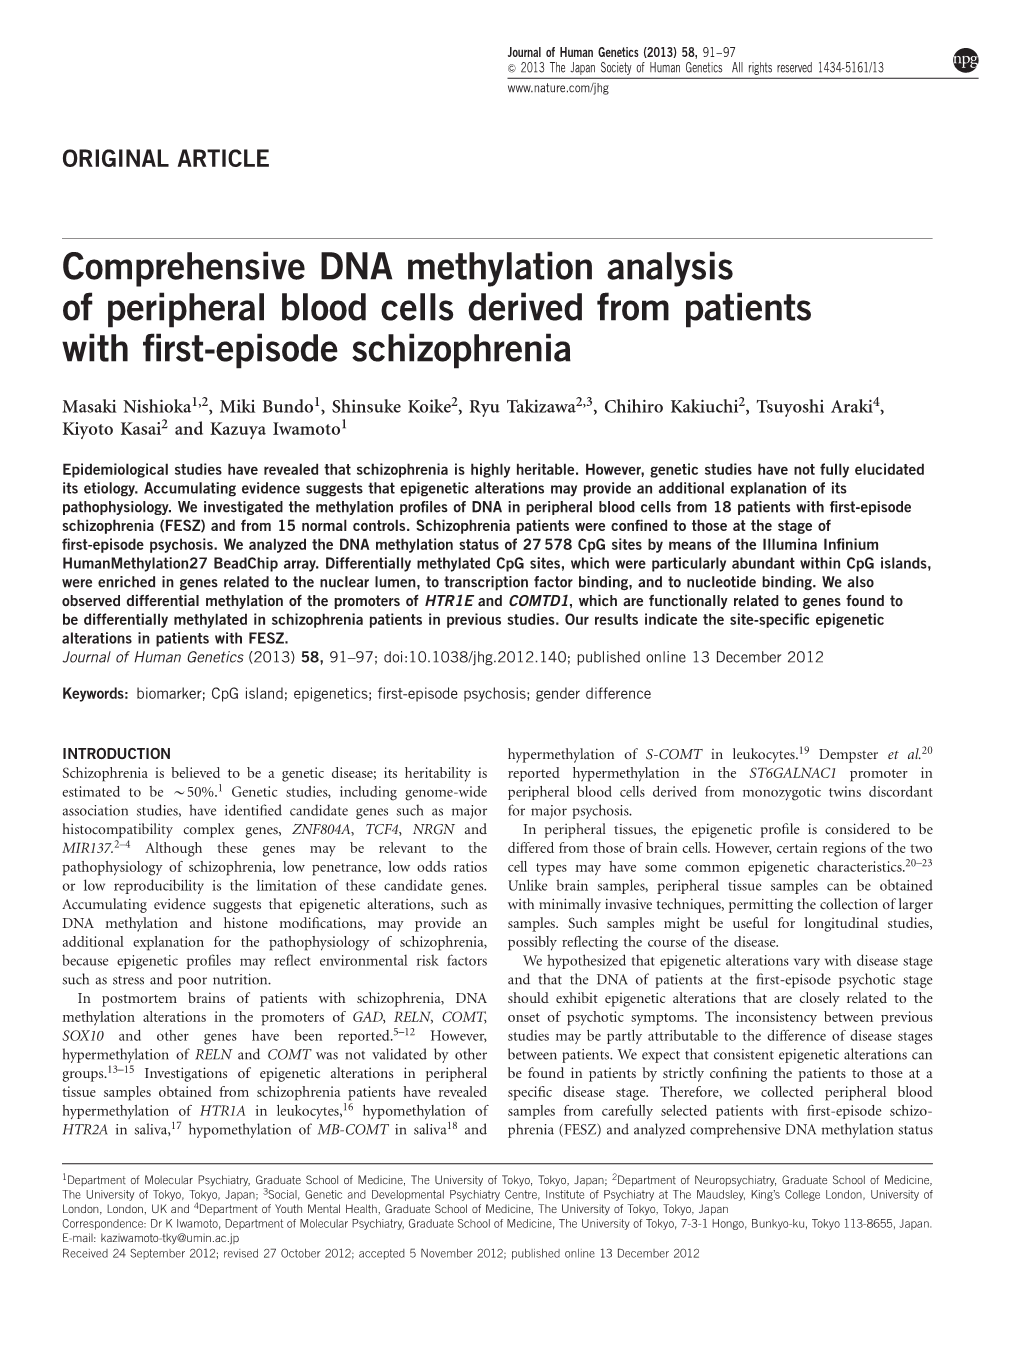 Comprehensive DNA Methylation Analysis of Peripheral Blood Cells Derived from Patients with ﬁrst-Episode Schizophrenia